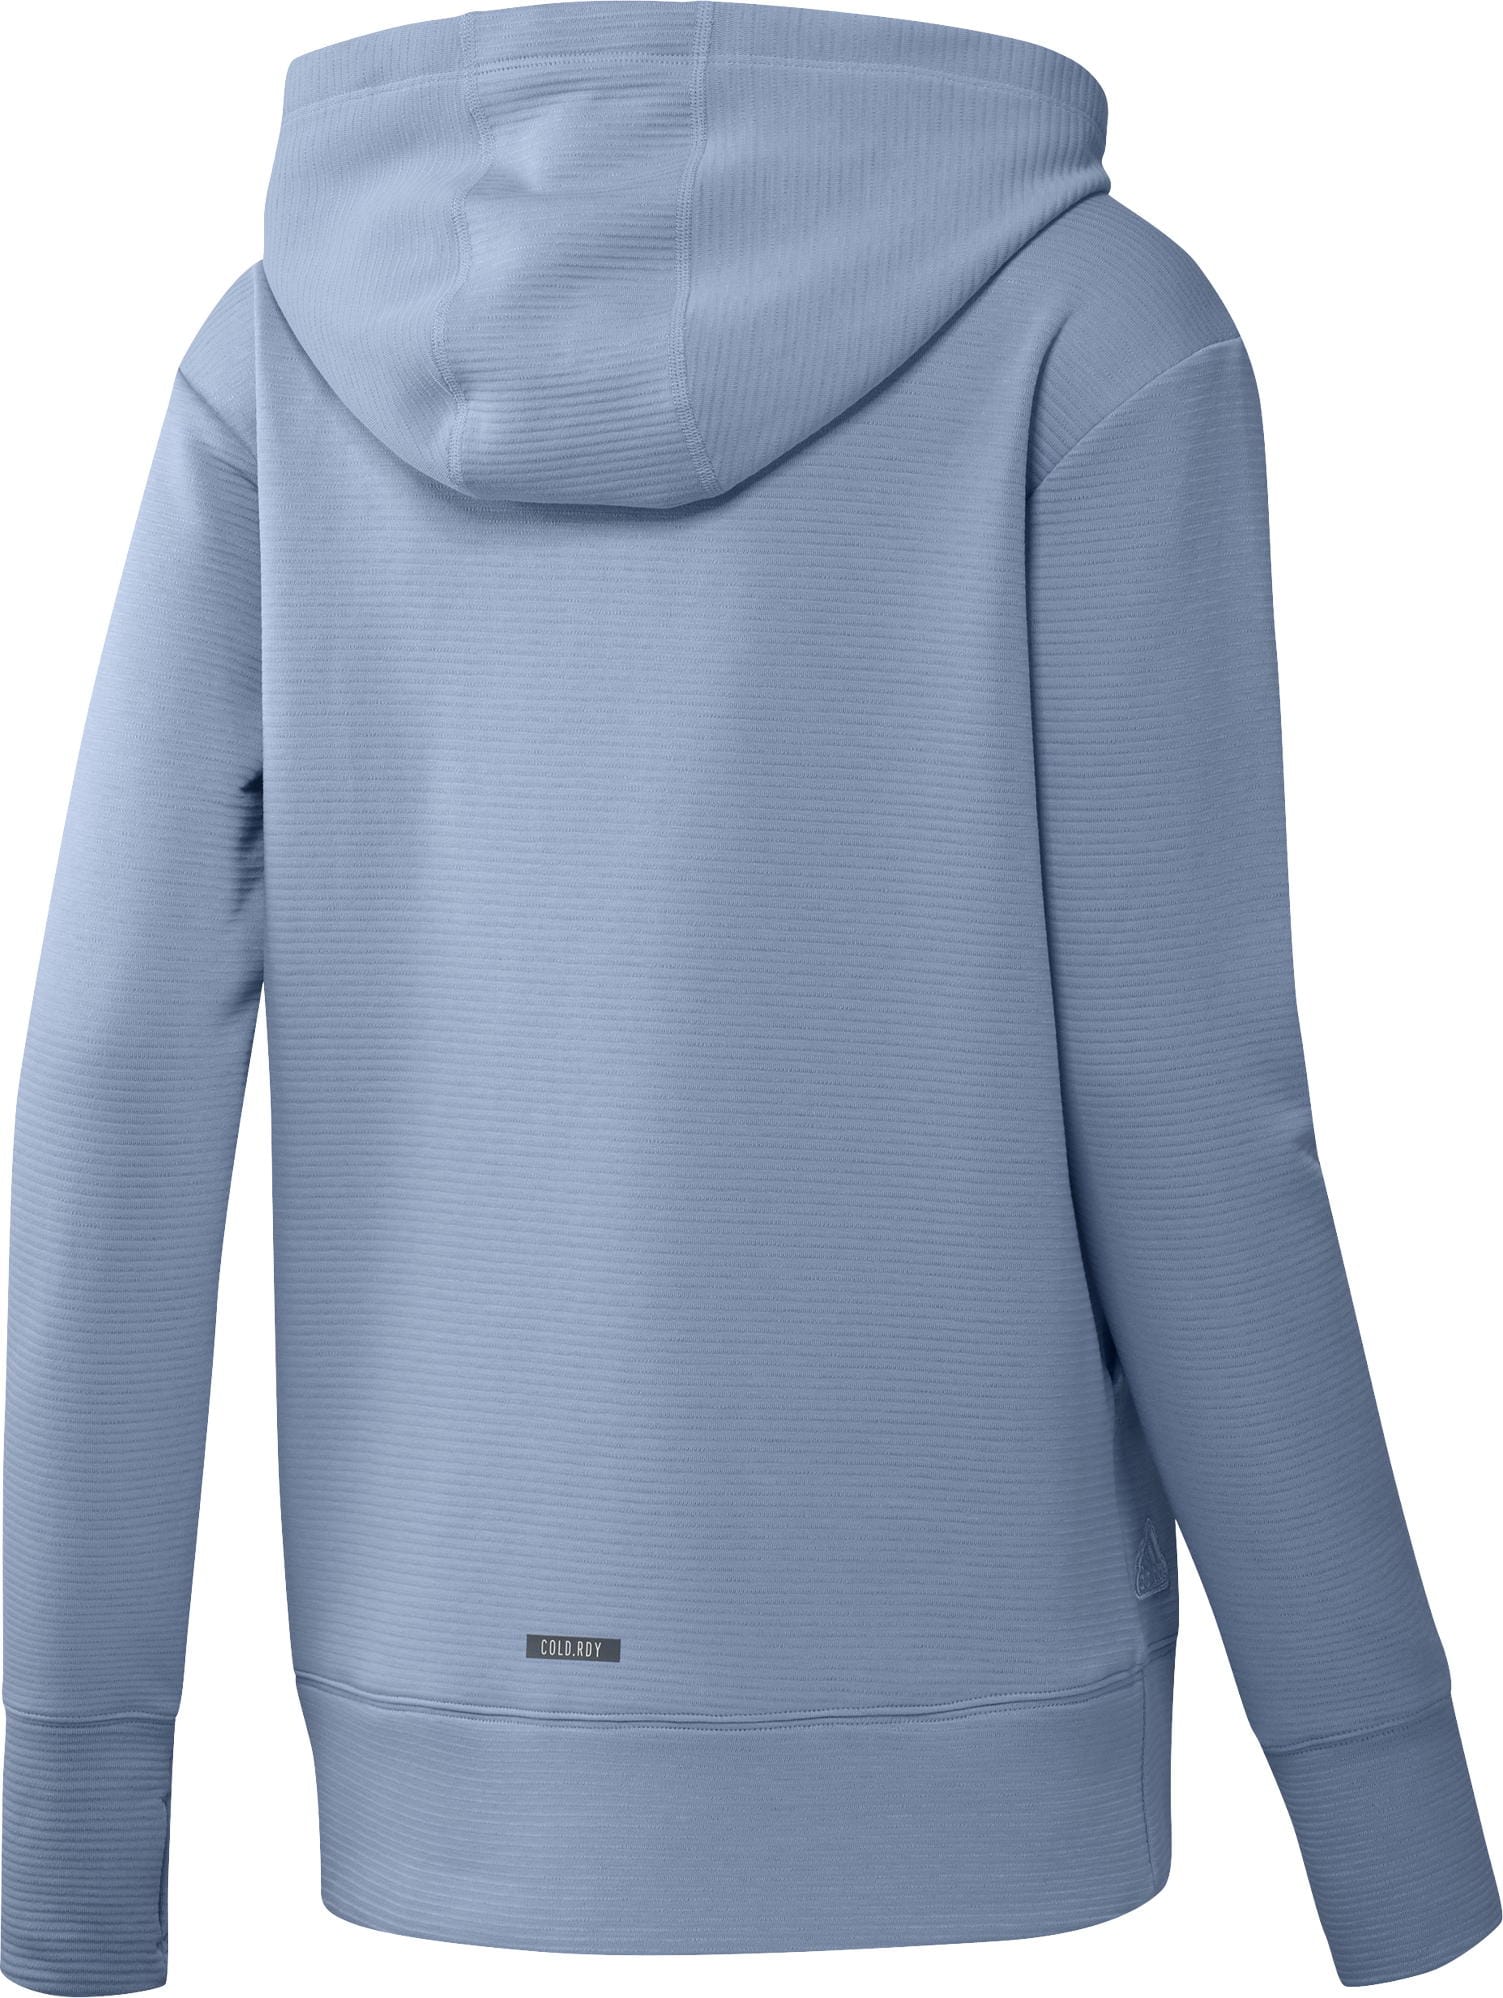 adidas COLD.RDY Go-To Hoodie, sky